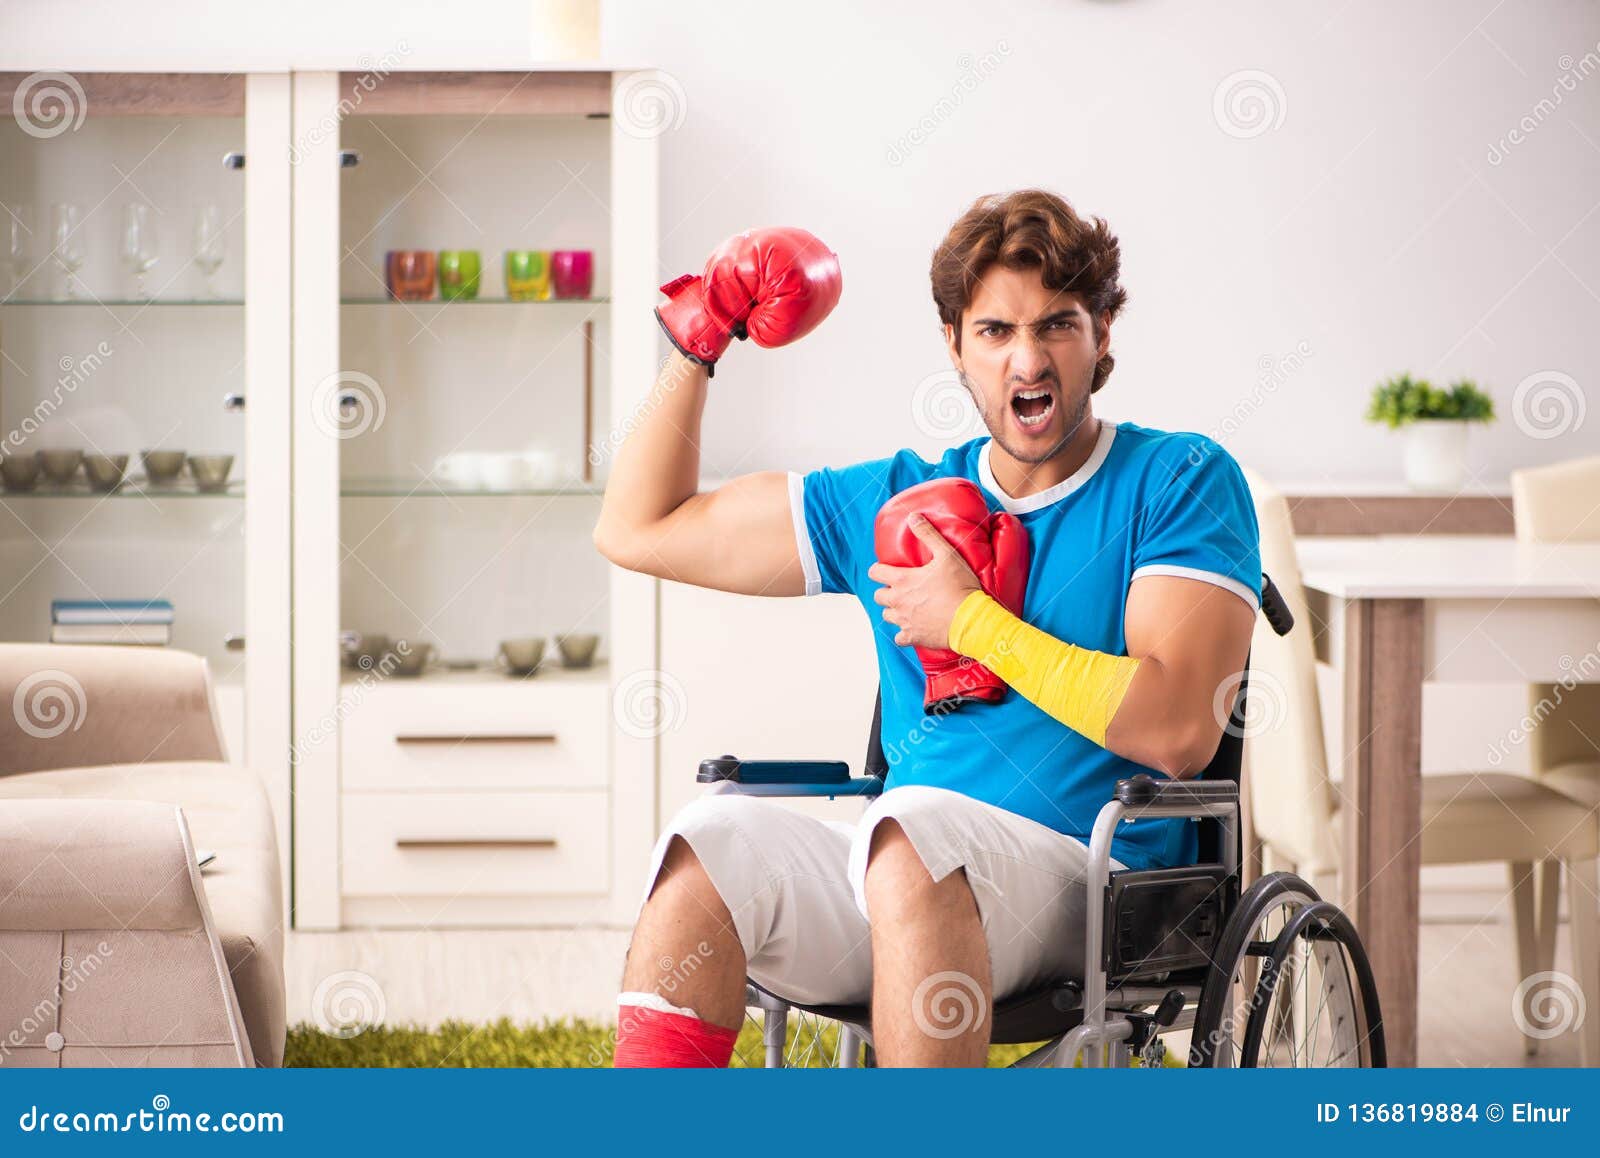 The Injured Man Recovering From His Injury Stock Photo Image Of